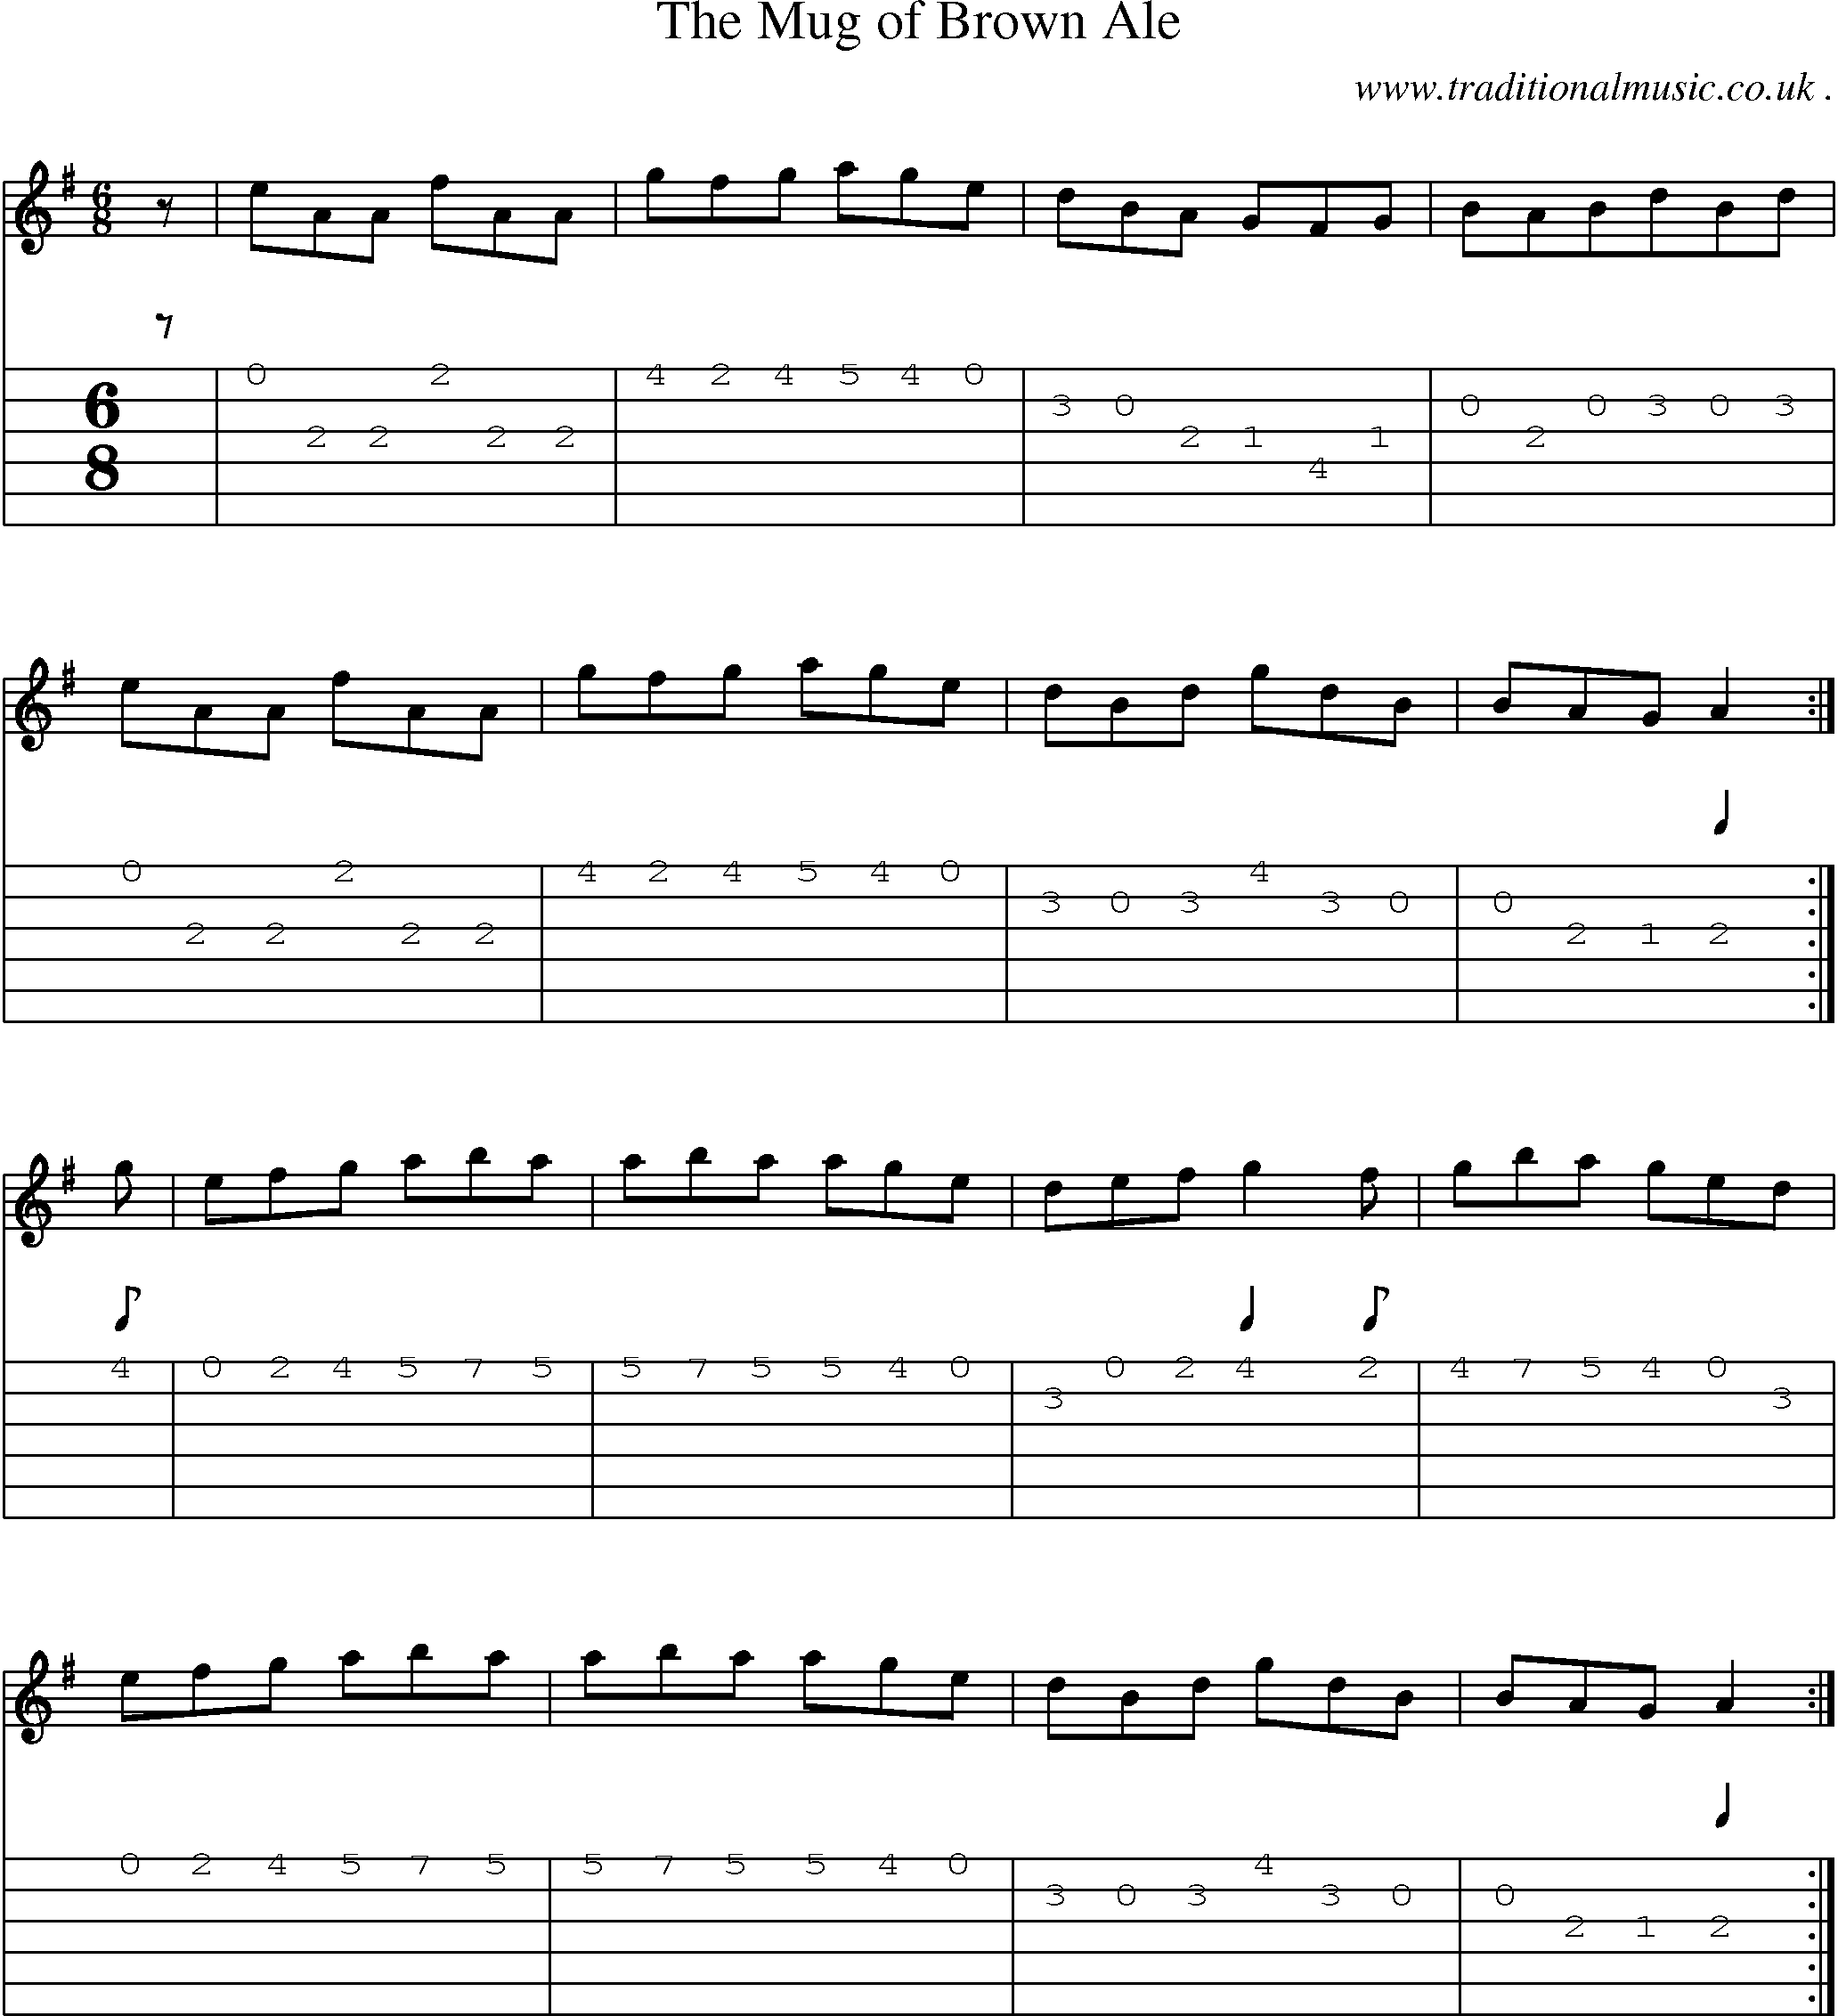 Sheet-Music and Guitar Tabs for The Mug Of Brown Ale